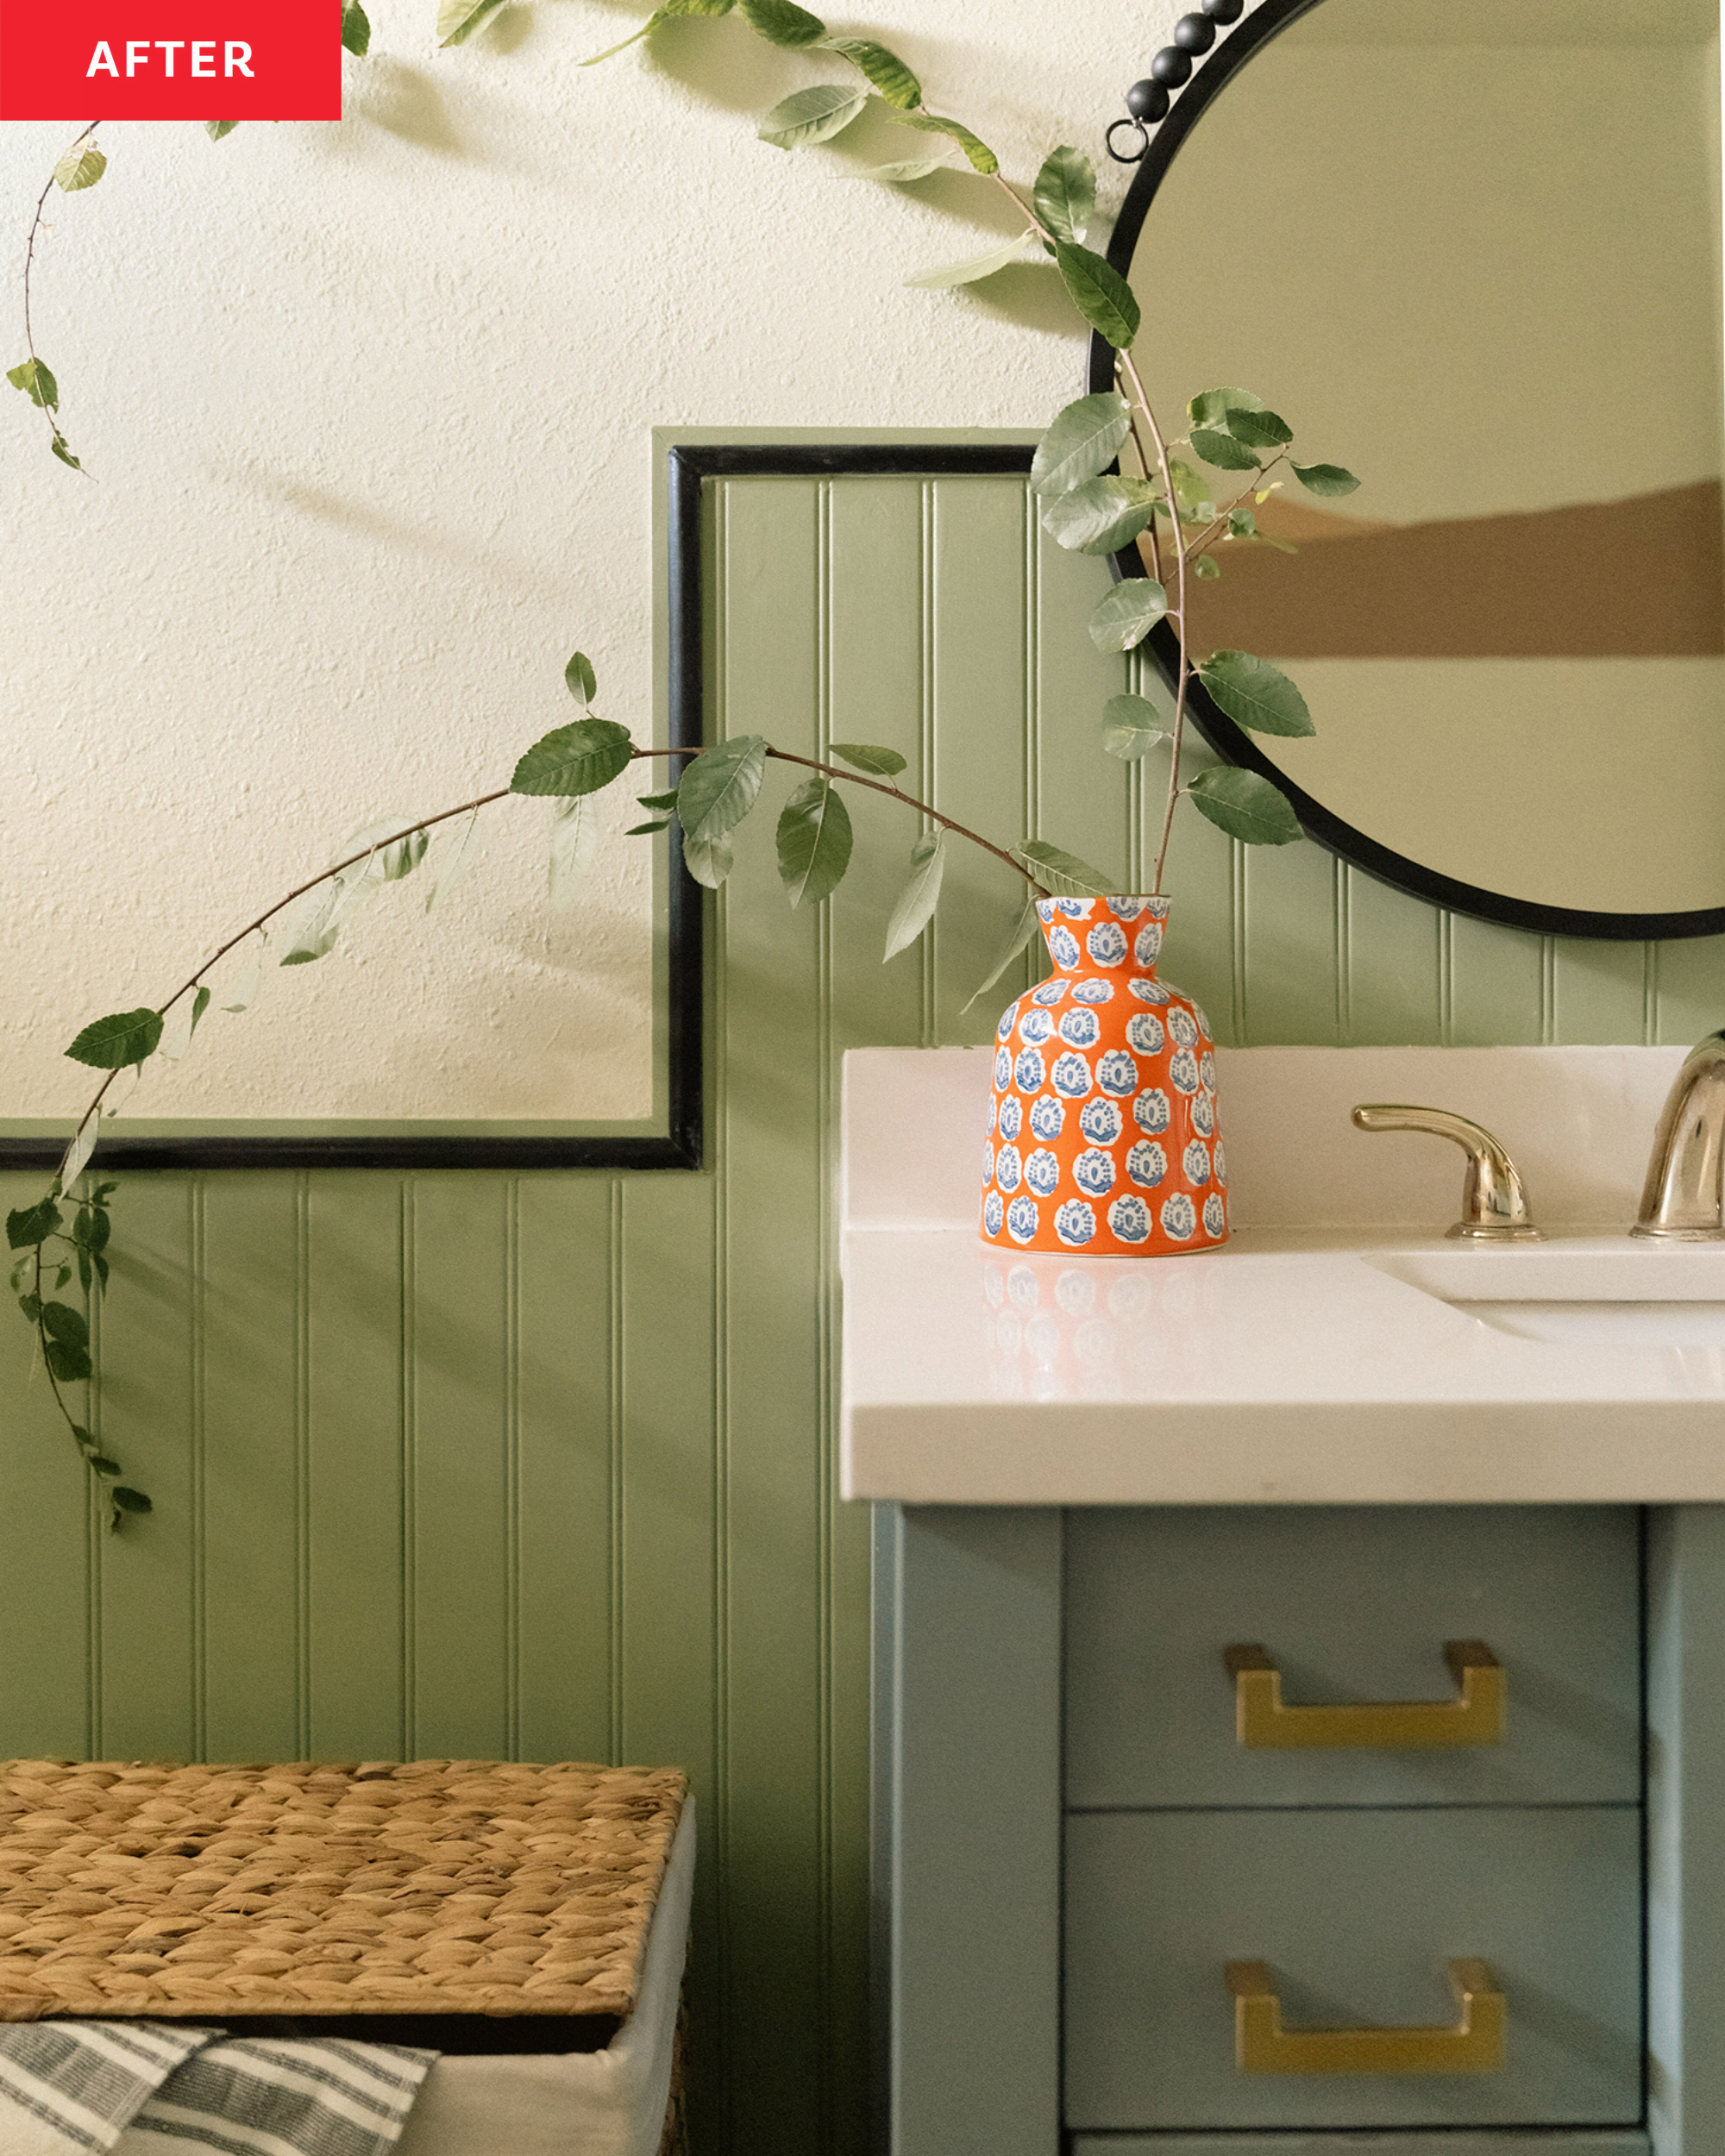 Behr Will Transform a Room You Want Painted Into a Mini Diorama